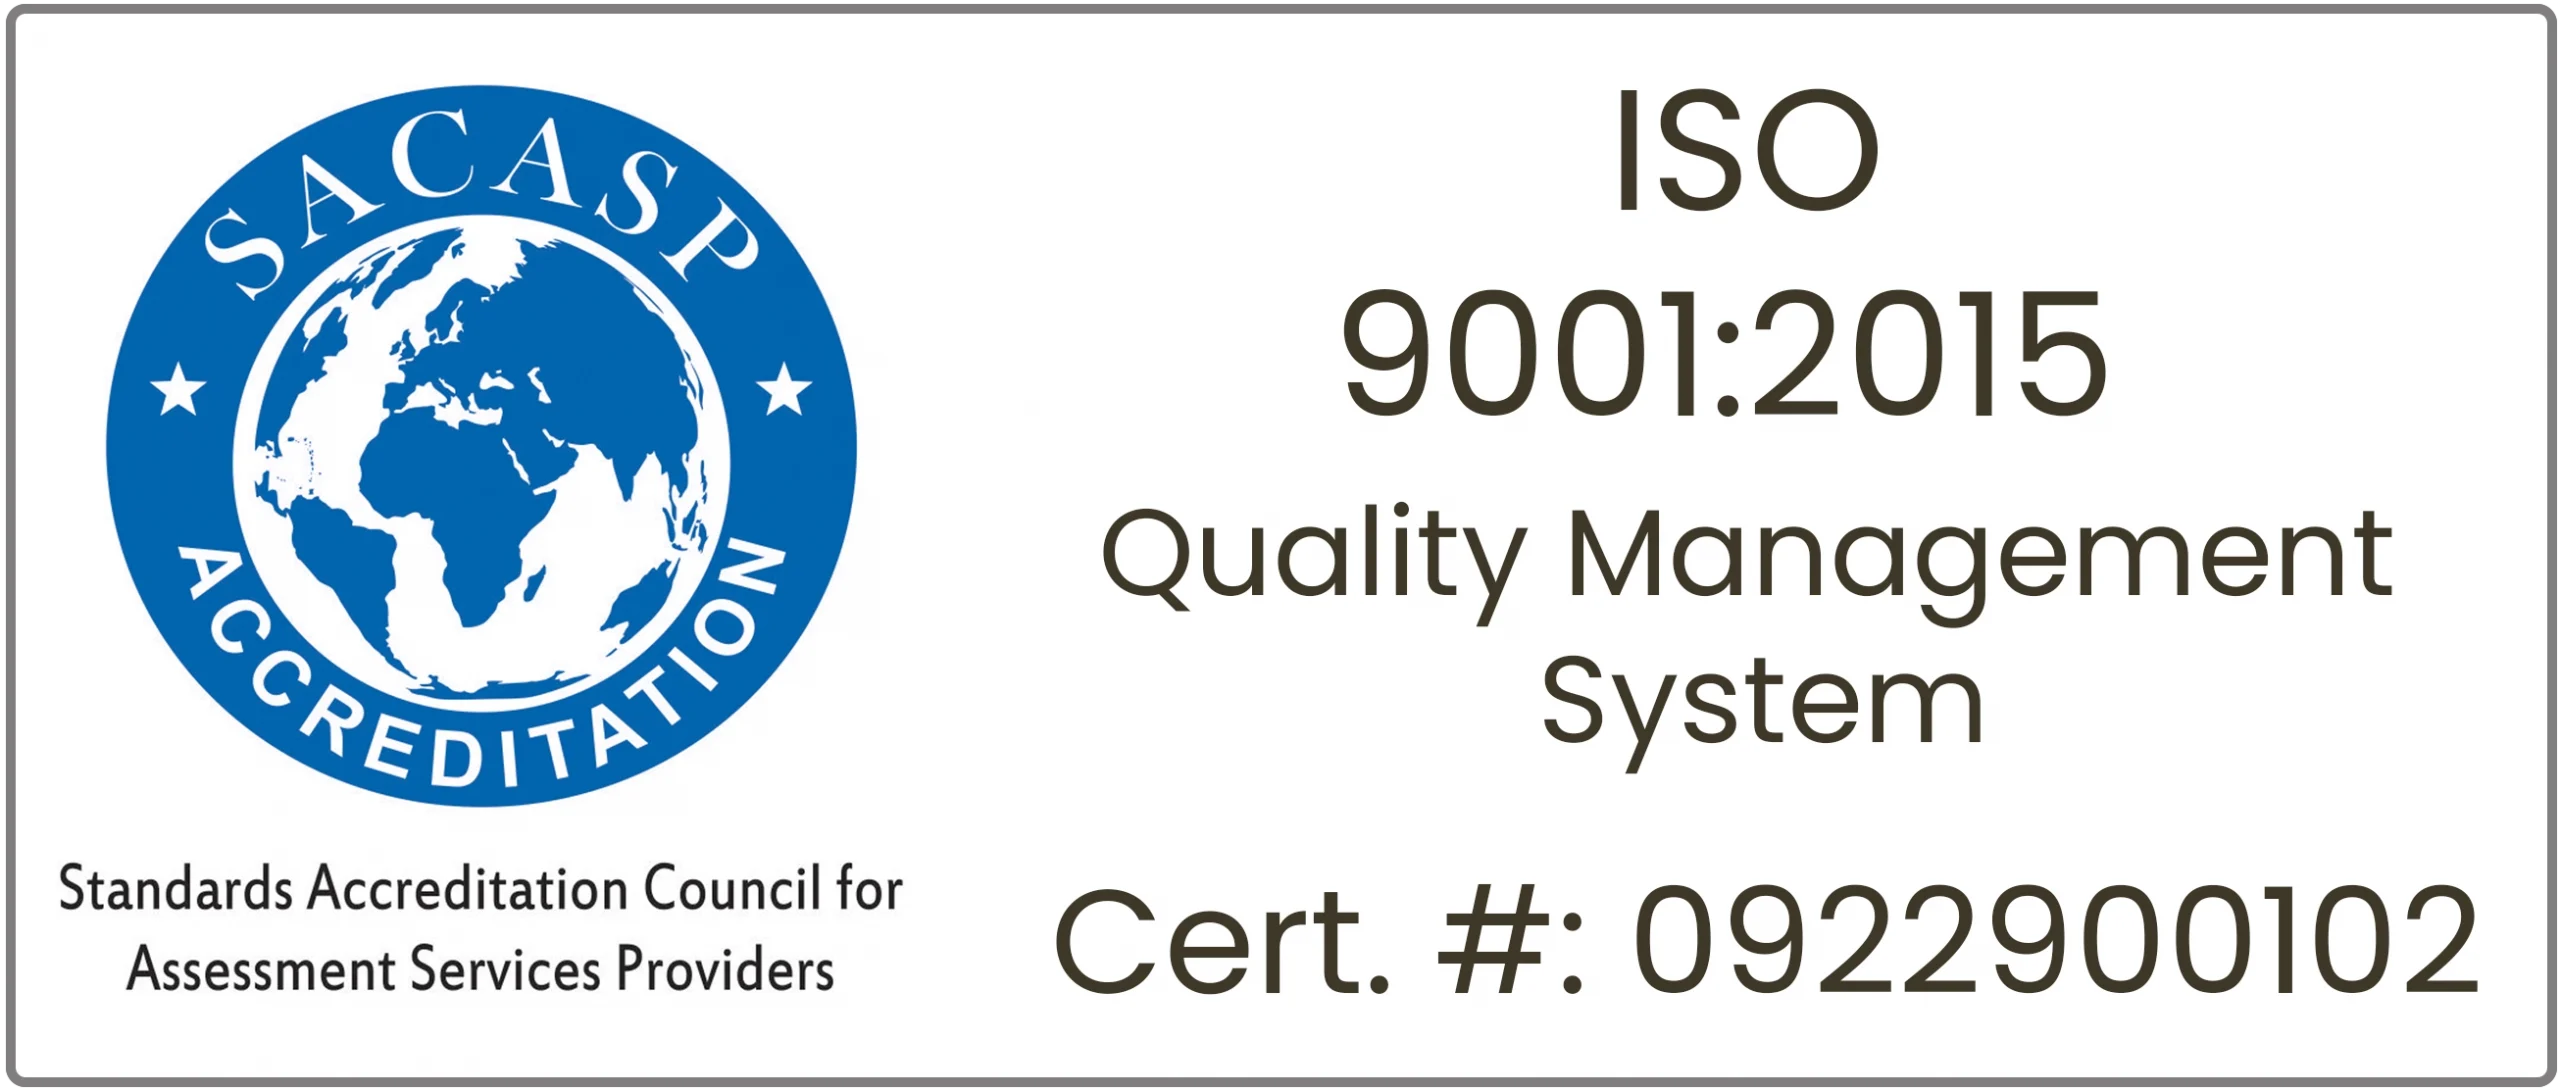 ISO 9001:2015 - Quality management systems